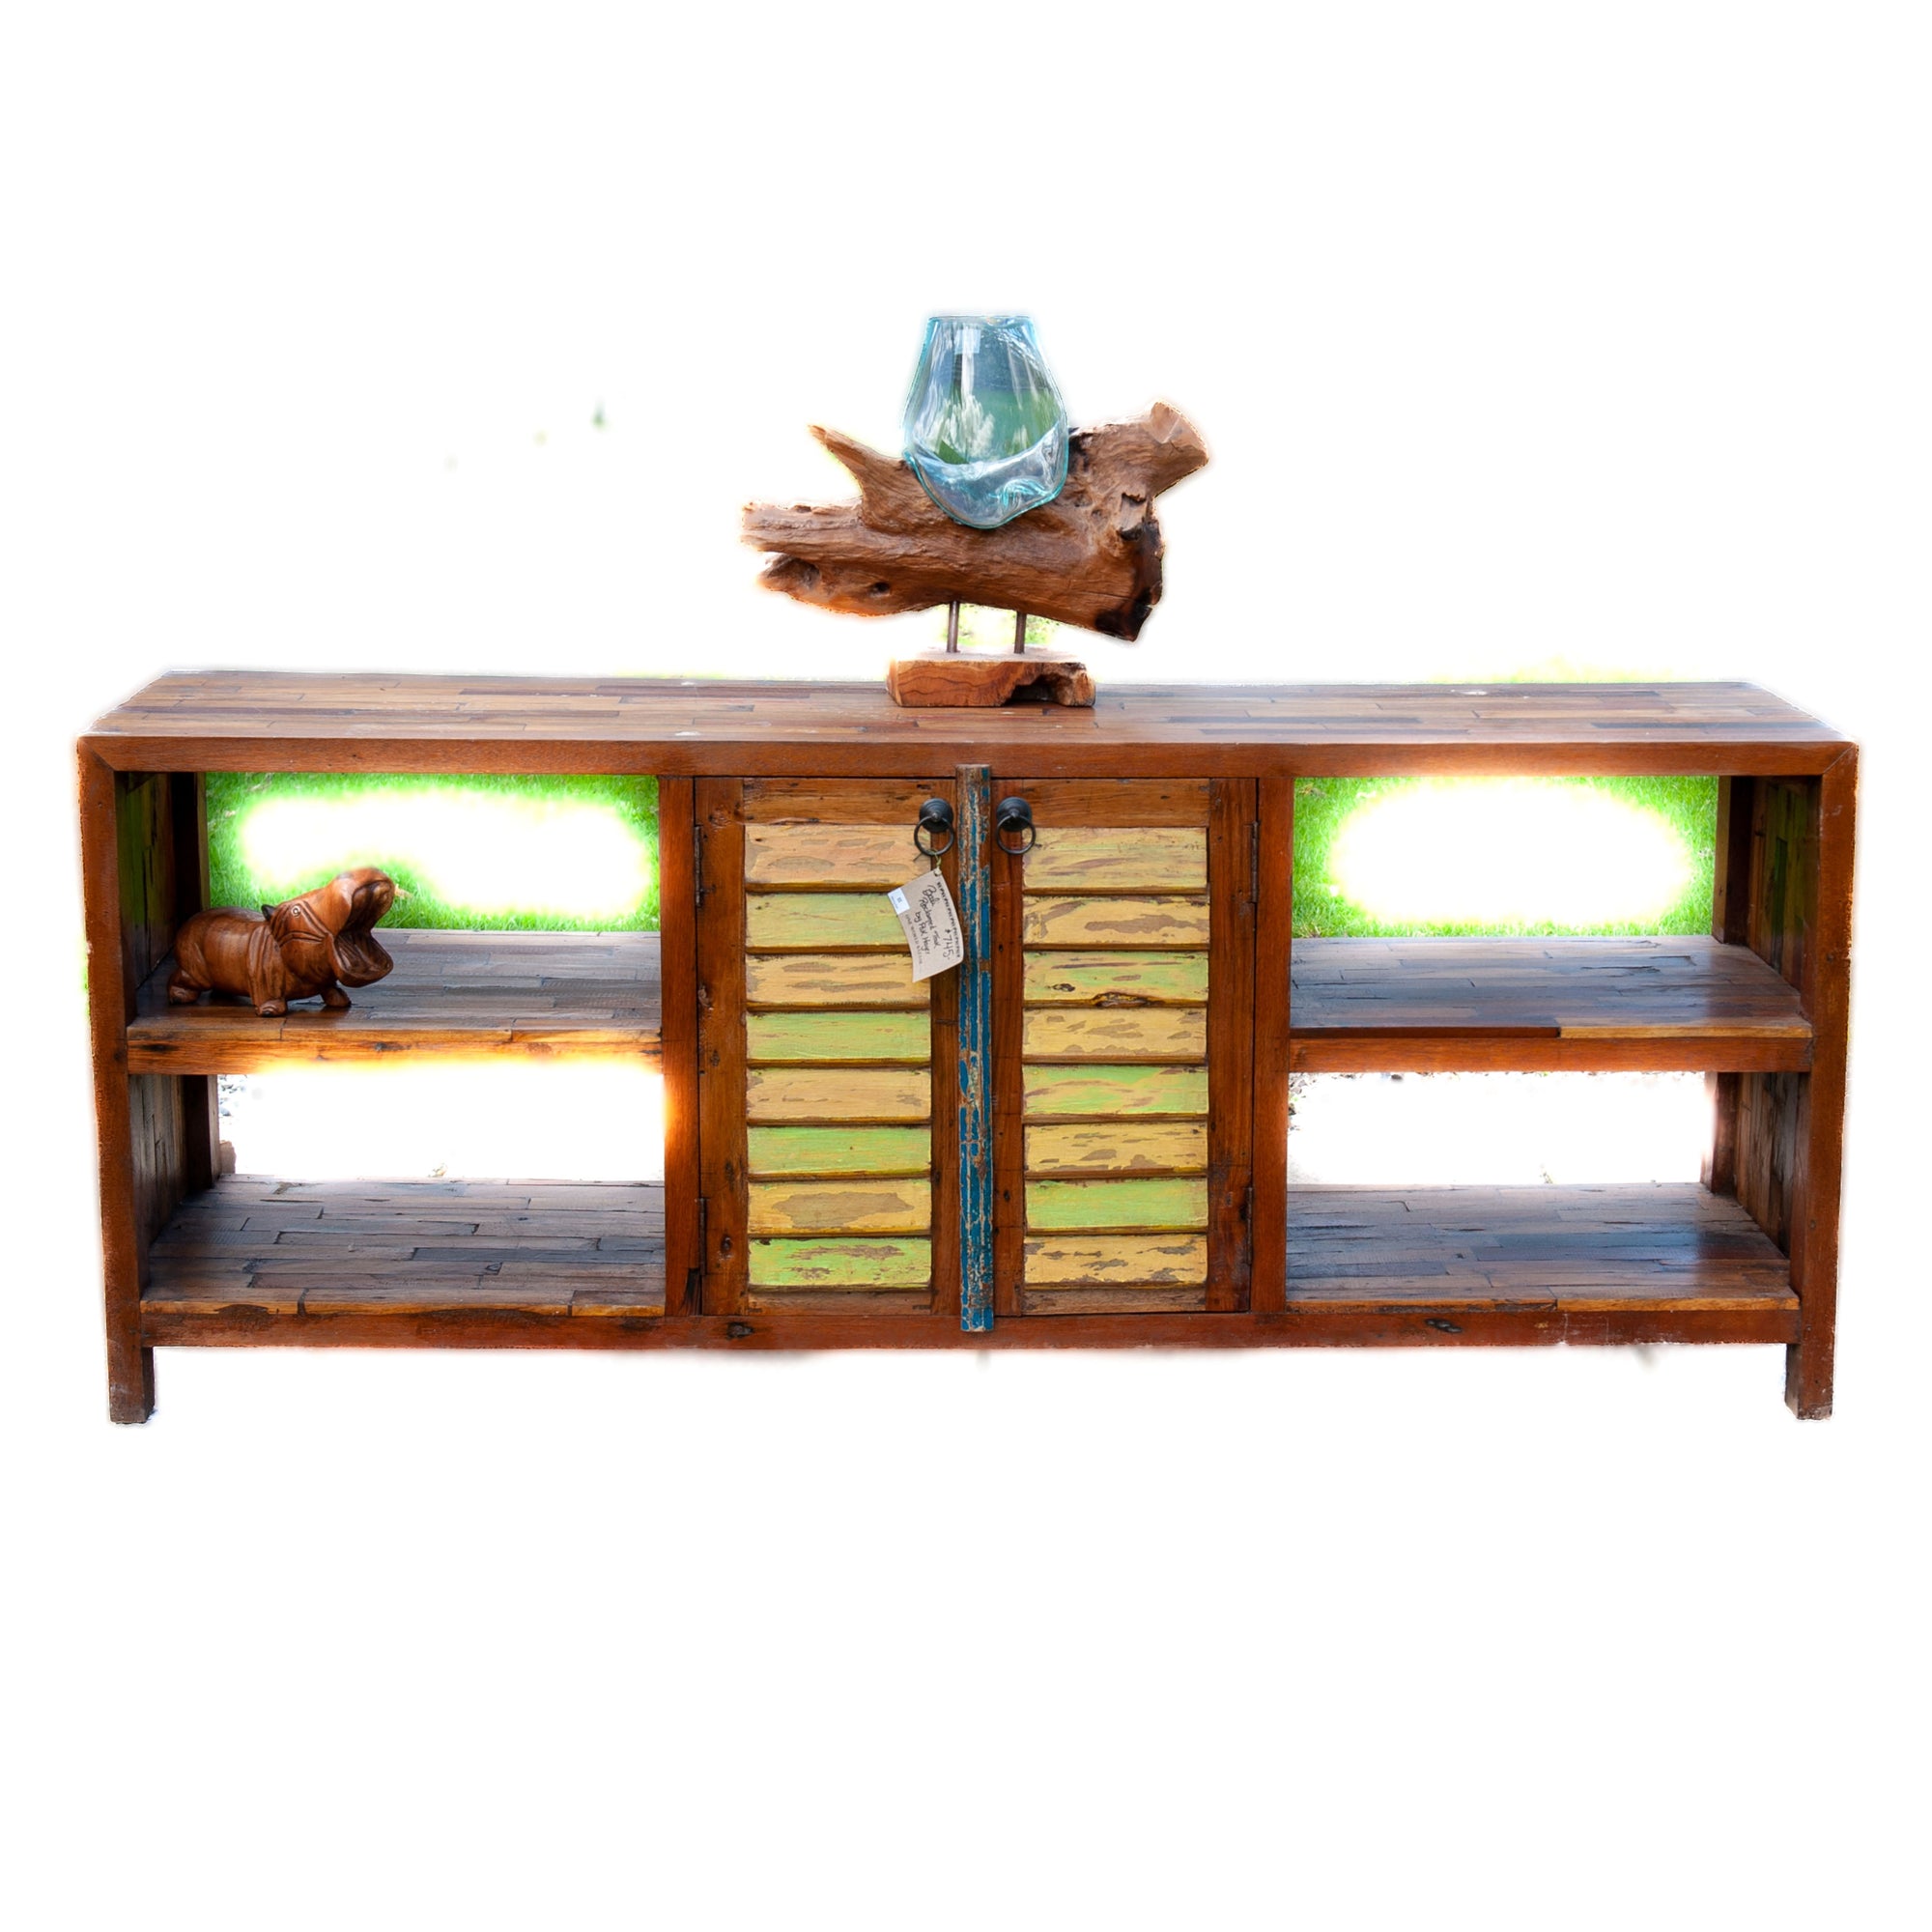 Large teak wood console media unit with distressed paint job and storage shelves.